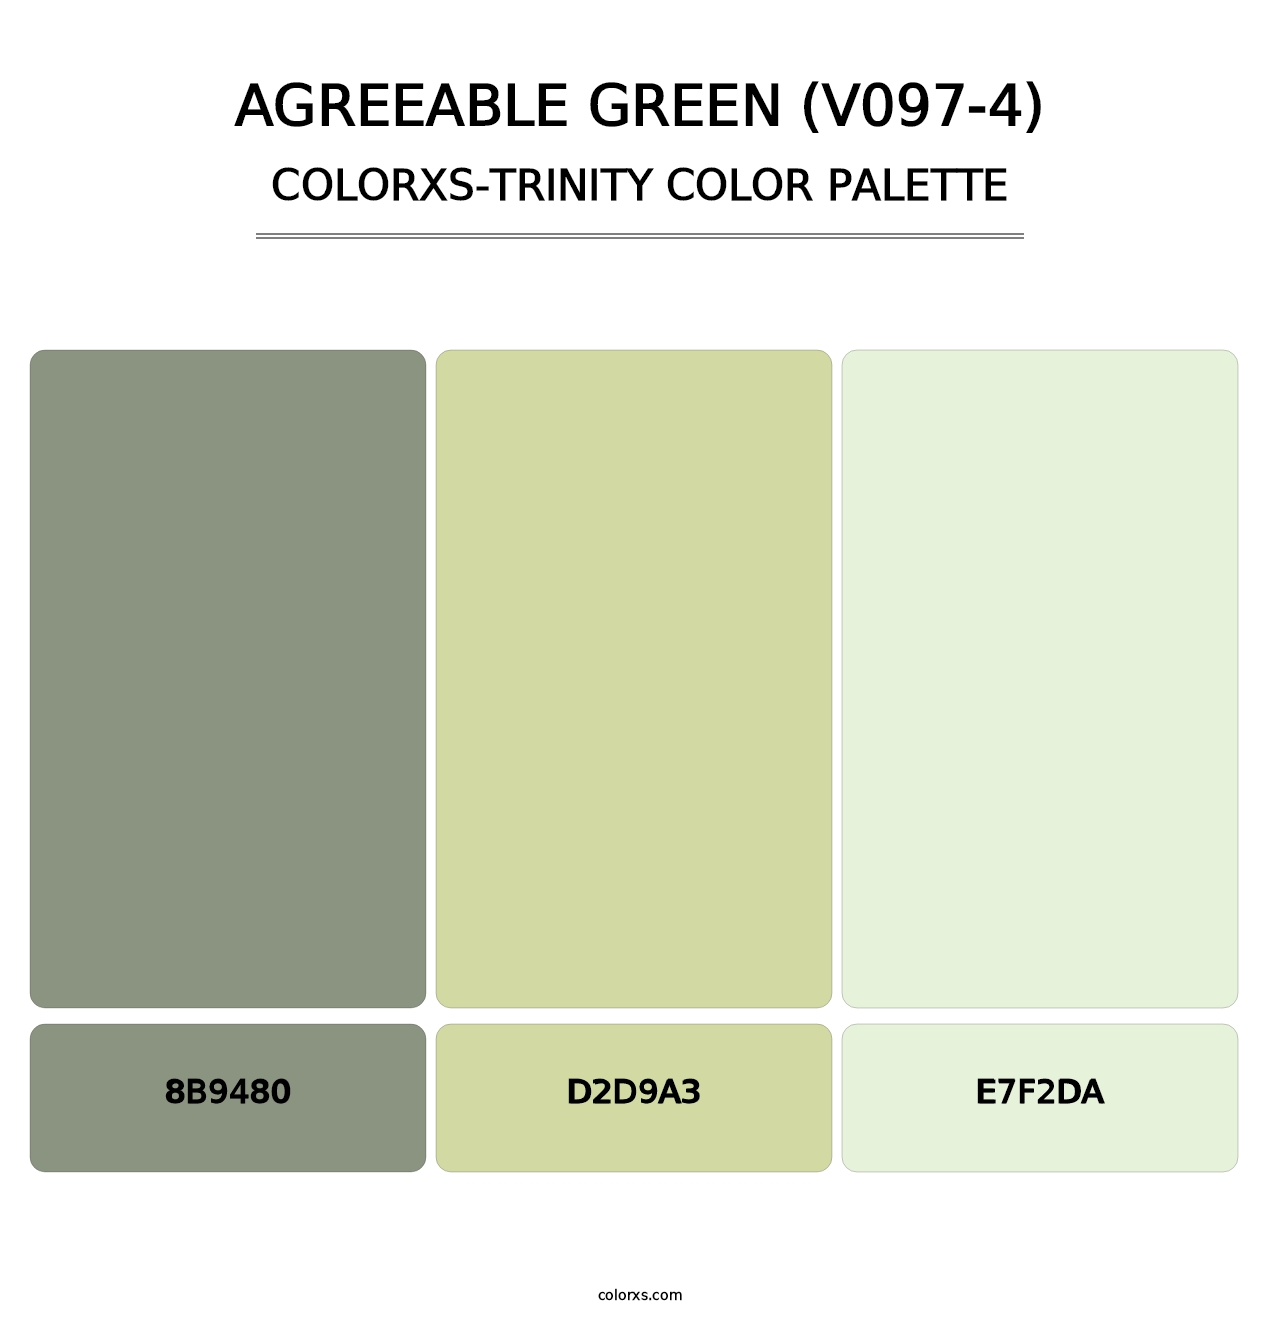 Agreeable Green (V097-4) - Colorxs Trinity Palette